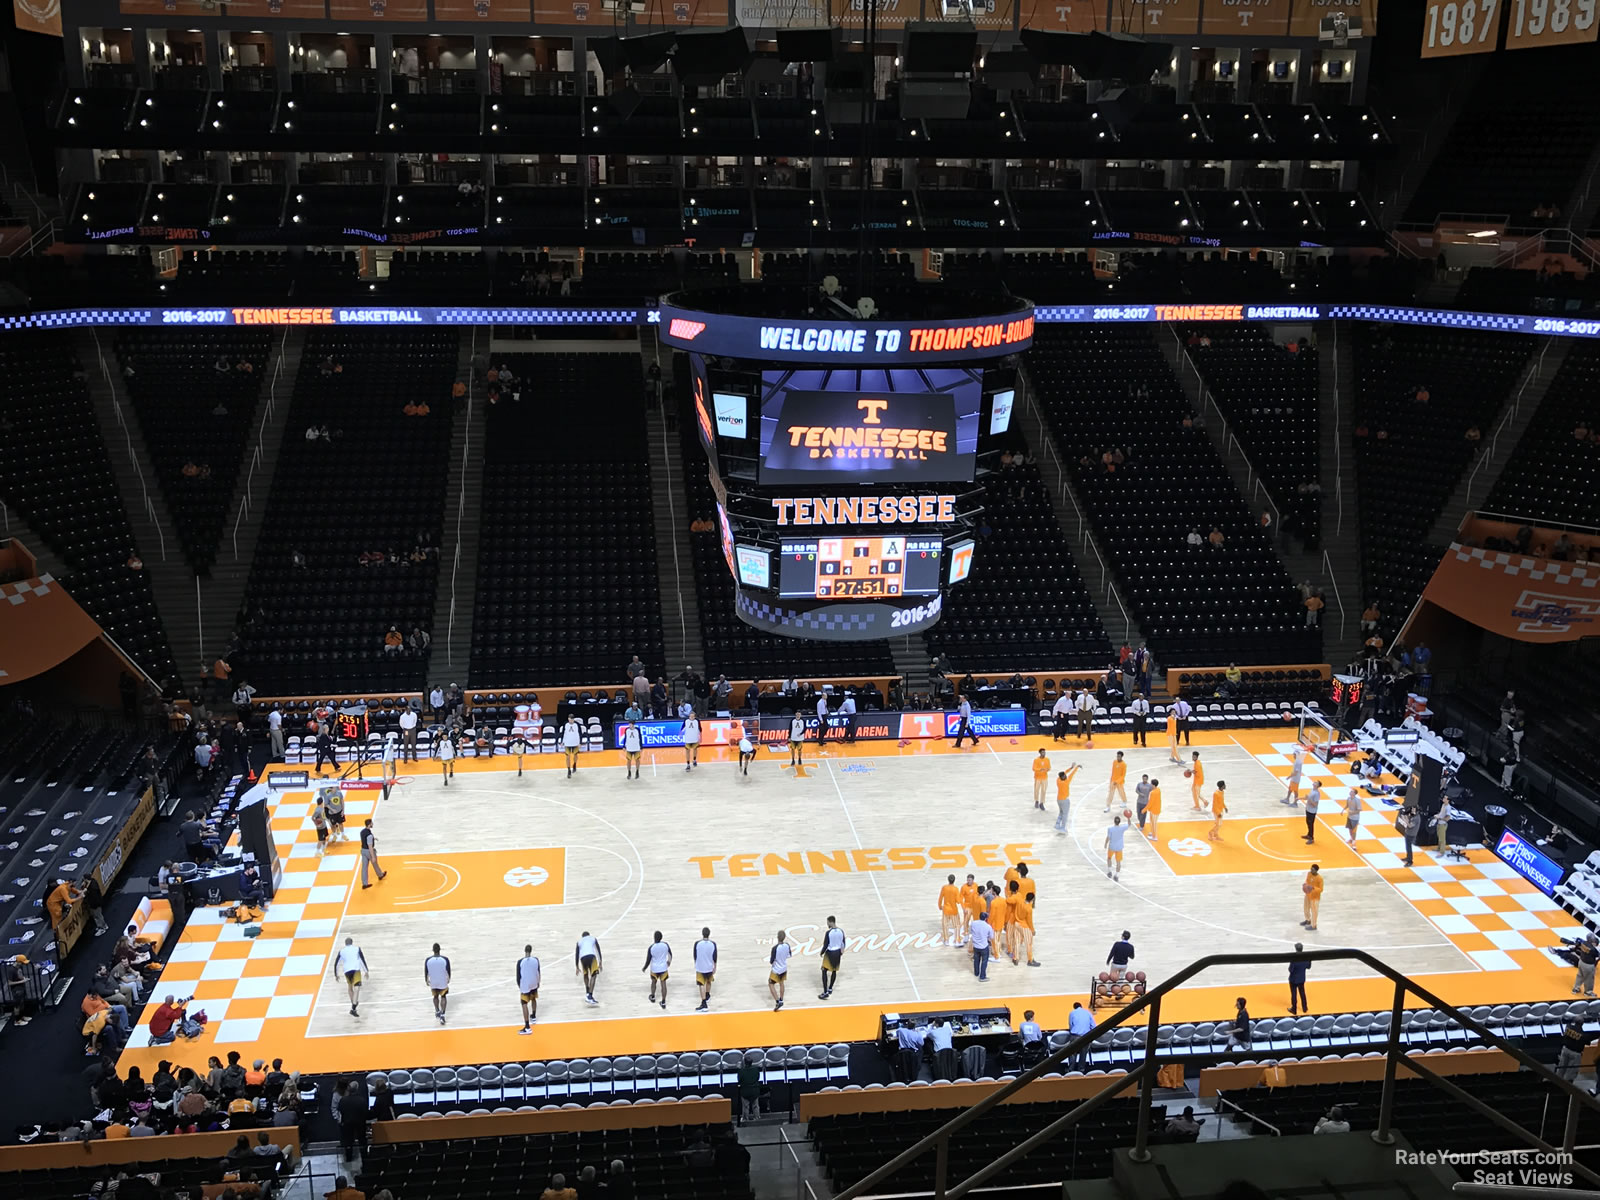 section 322, row 7 seat view  - thompson-boling arena